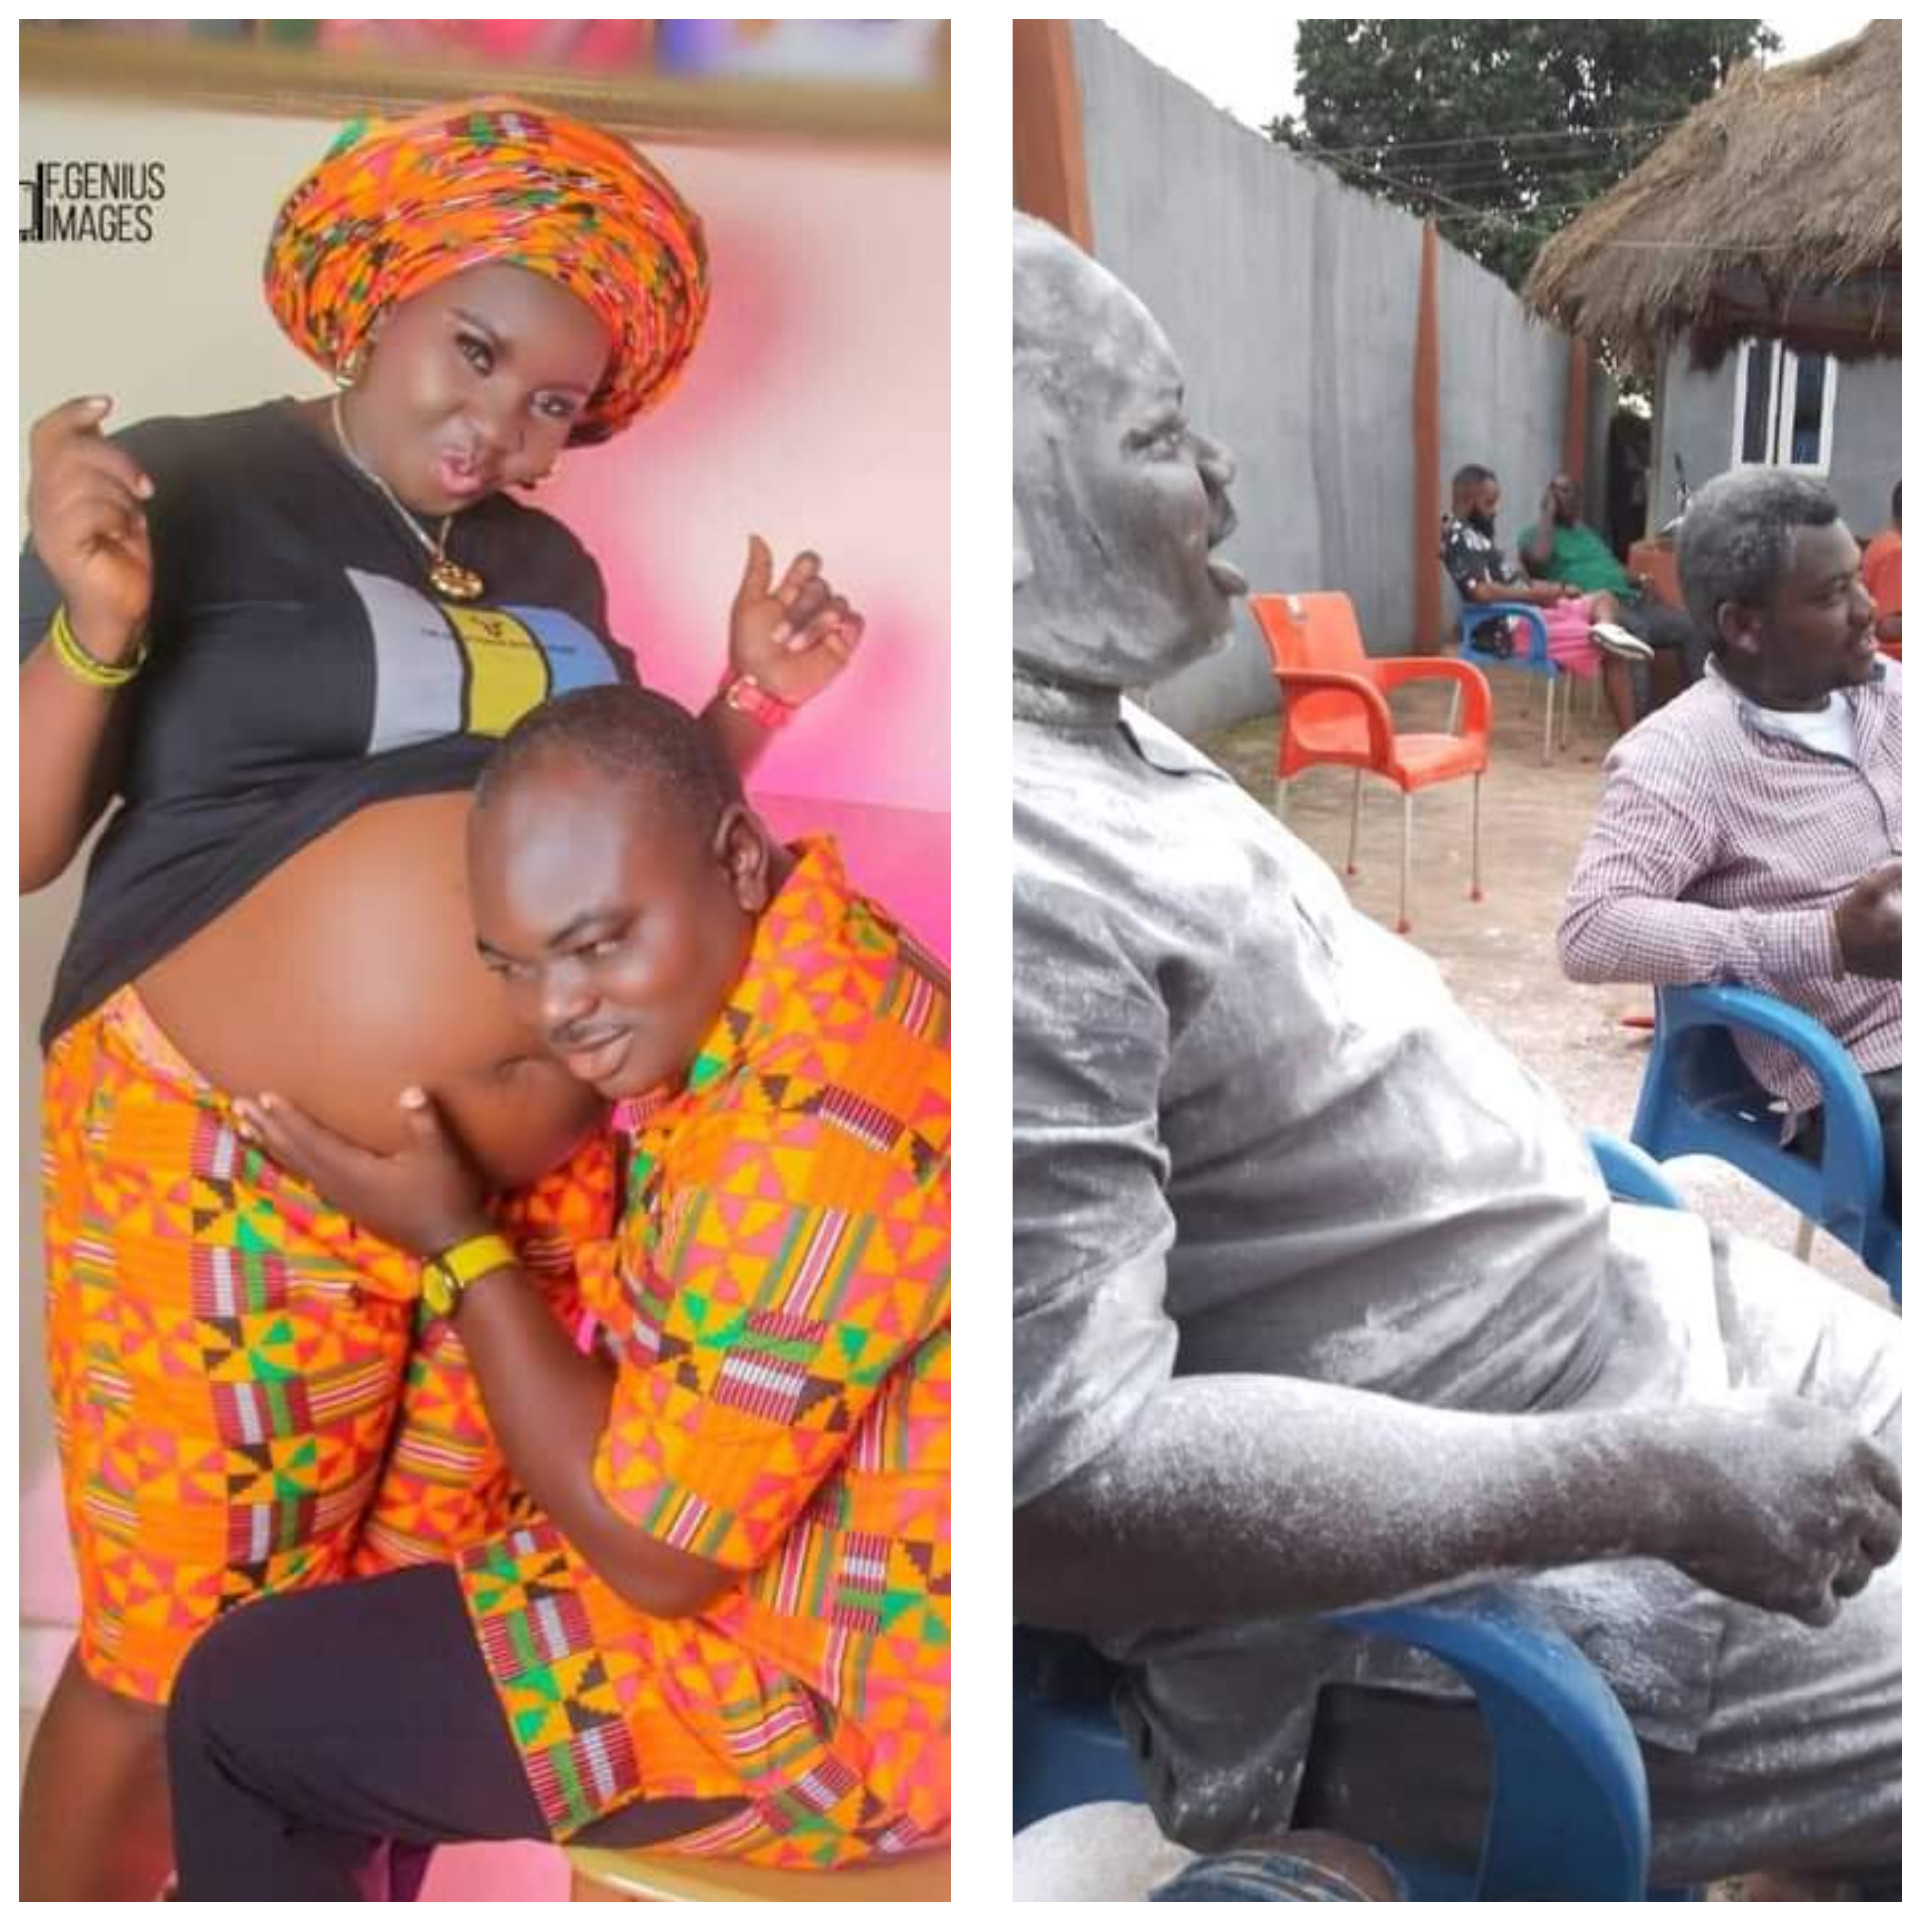 NIGERIAN MAN CELEBRATES AS HIS FRIEND BECOMES A FATHER AFTER 11 YEARS OF WAITING